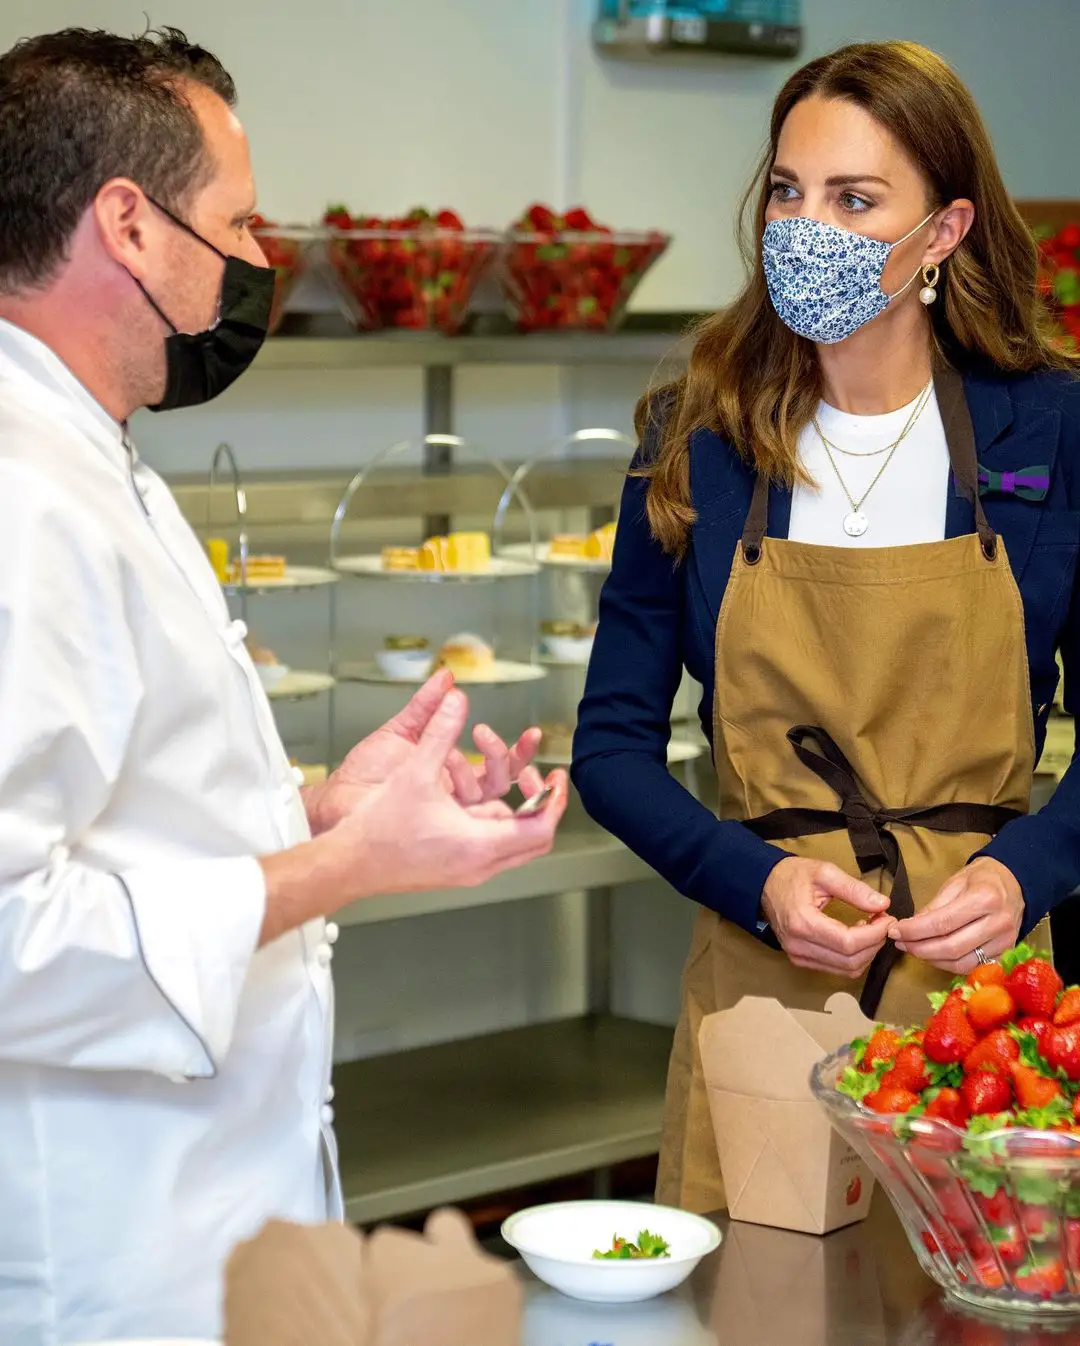 The Duchess of Cambridge met with Executive Chef Adam Fargin in the ground kitchen to learn how the kitchen has been used by the AELTC over the past year to prepare and distribute 200 daily hot meals for the local community in response to the pandemic